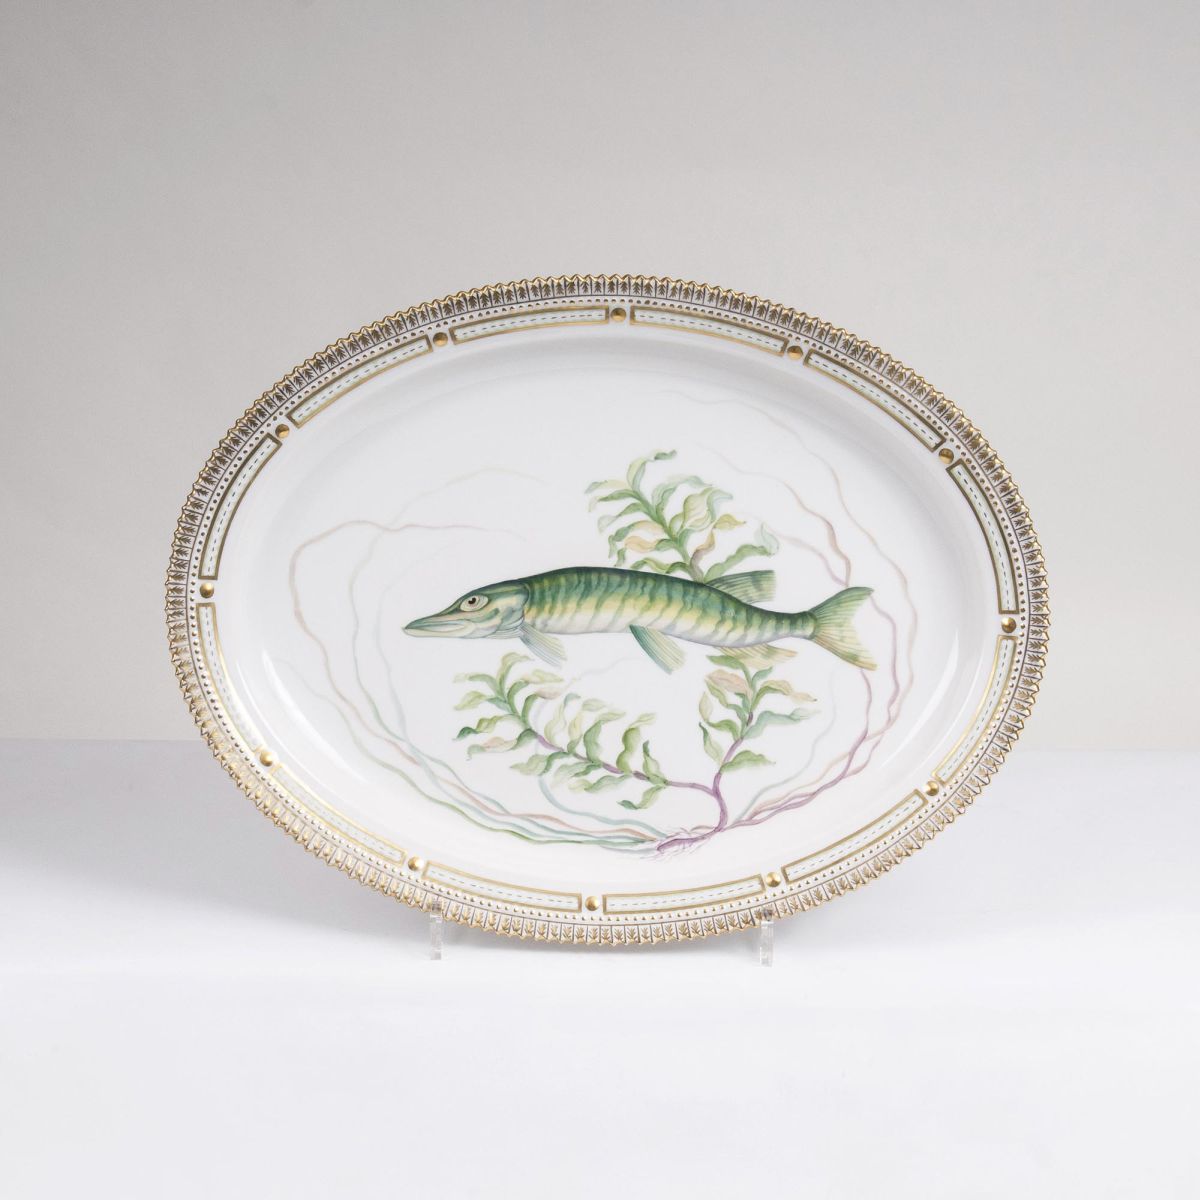 A large Oval Flora Danica Fish Platter with Pike